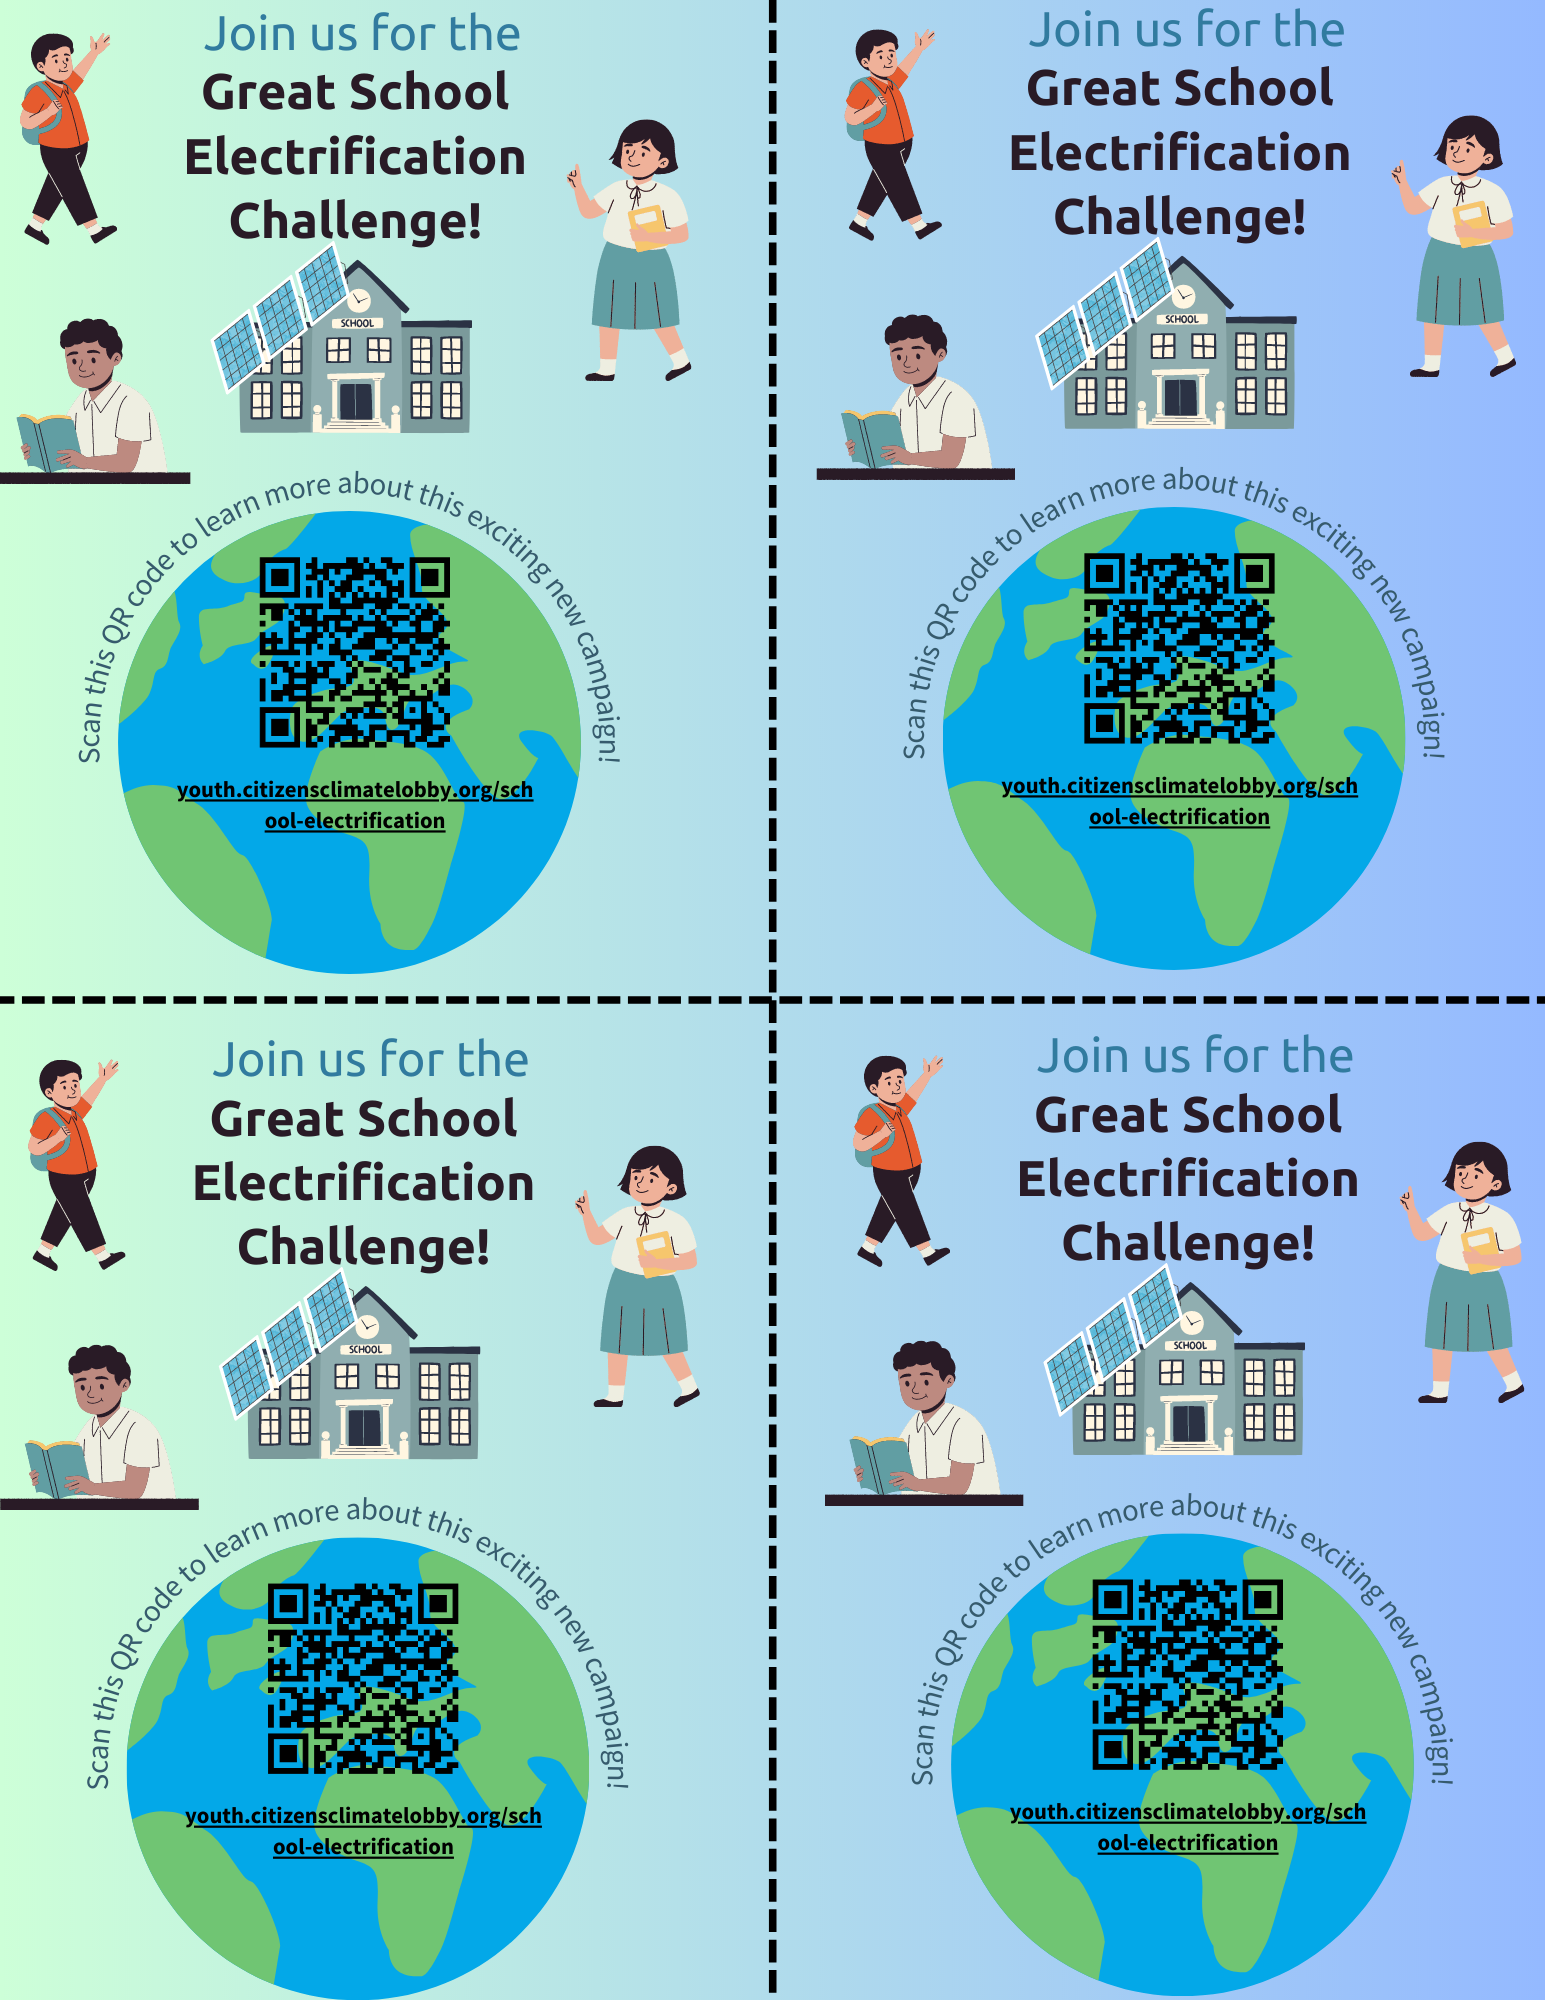 The Great School Electrification Challenge quarter page flyers with QR code to information. Graphics of students, a school, and earth can be seen in a blue and green background gradient